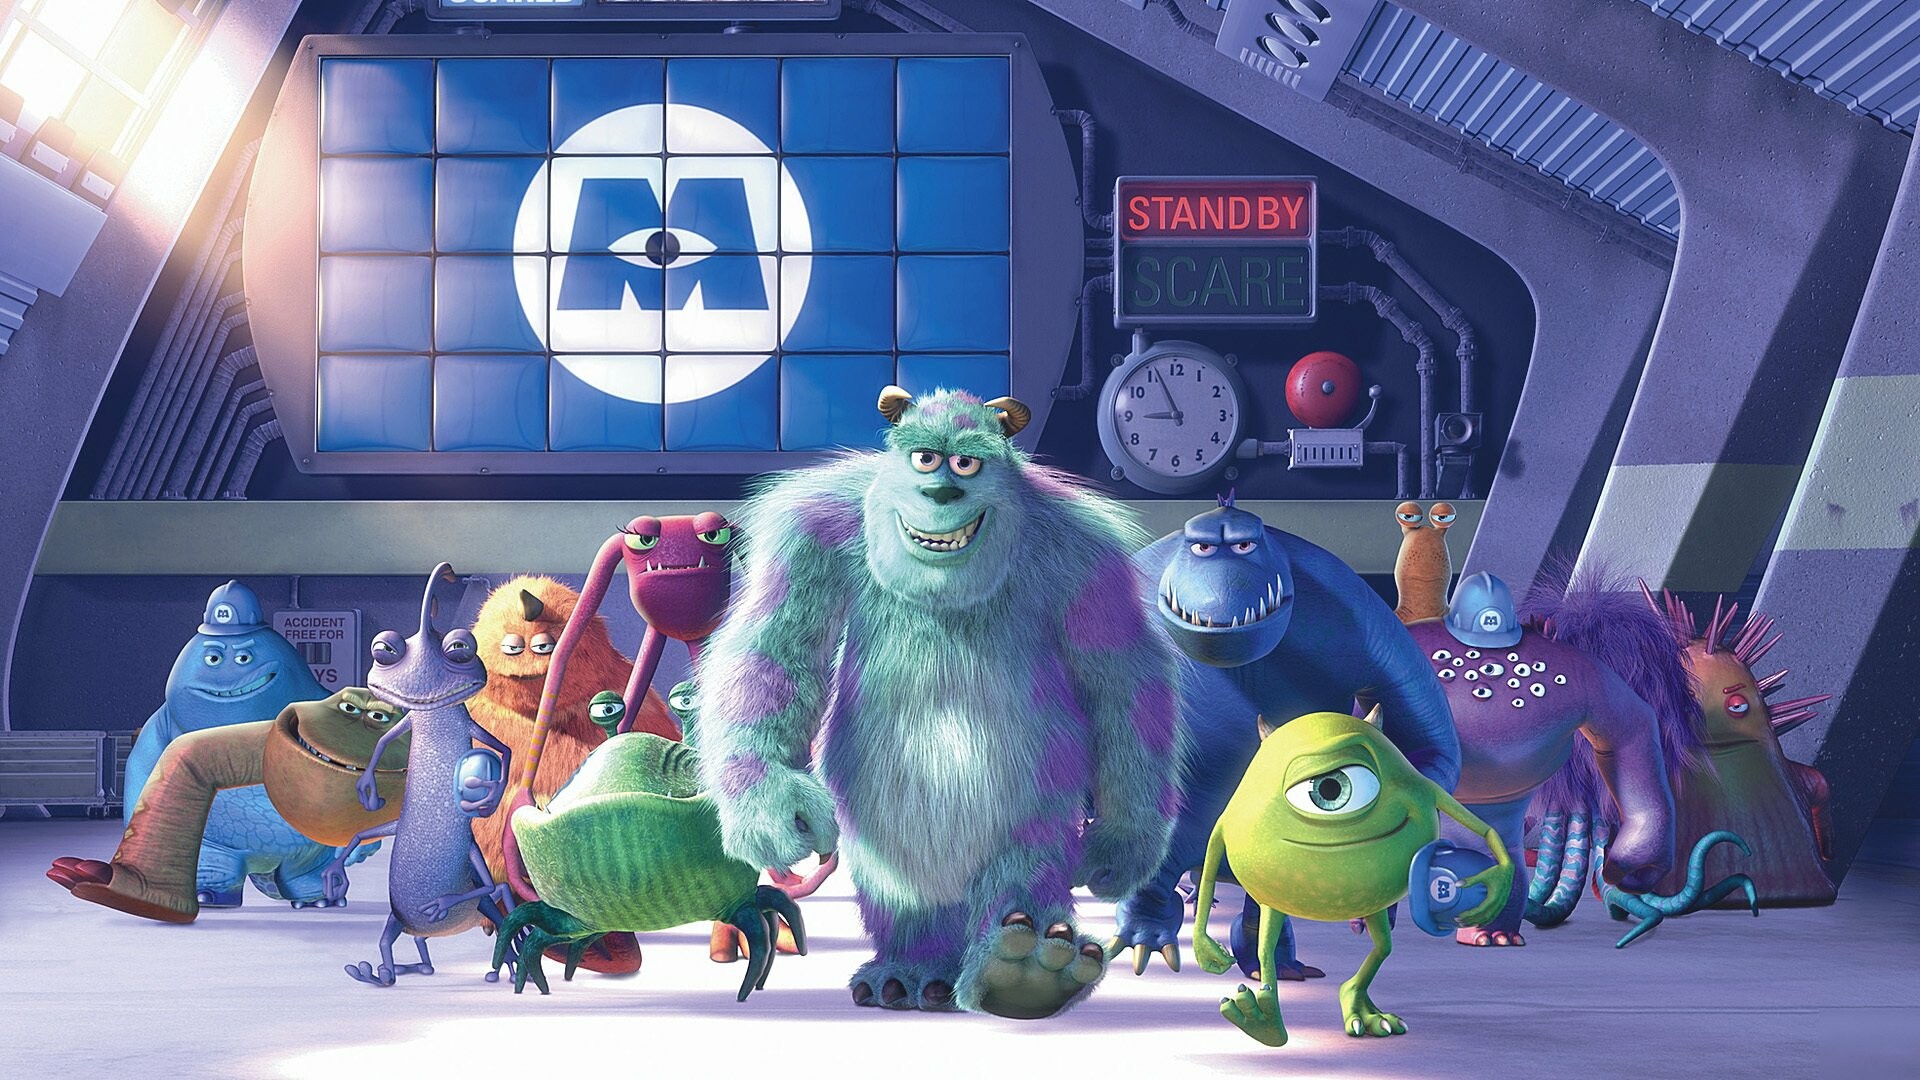 Monsters, Inc.: The Pixar franchise, Best friends Sulley and Mike. 1920x1080 Full HD Background.